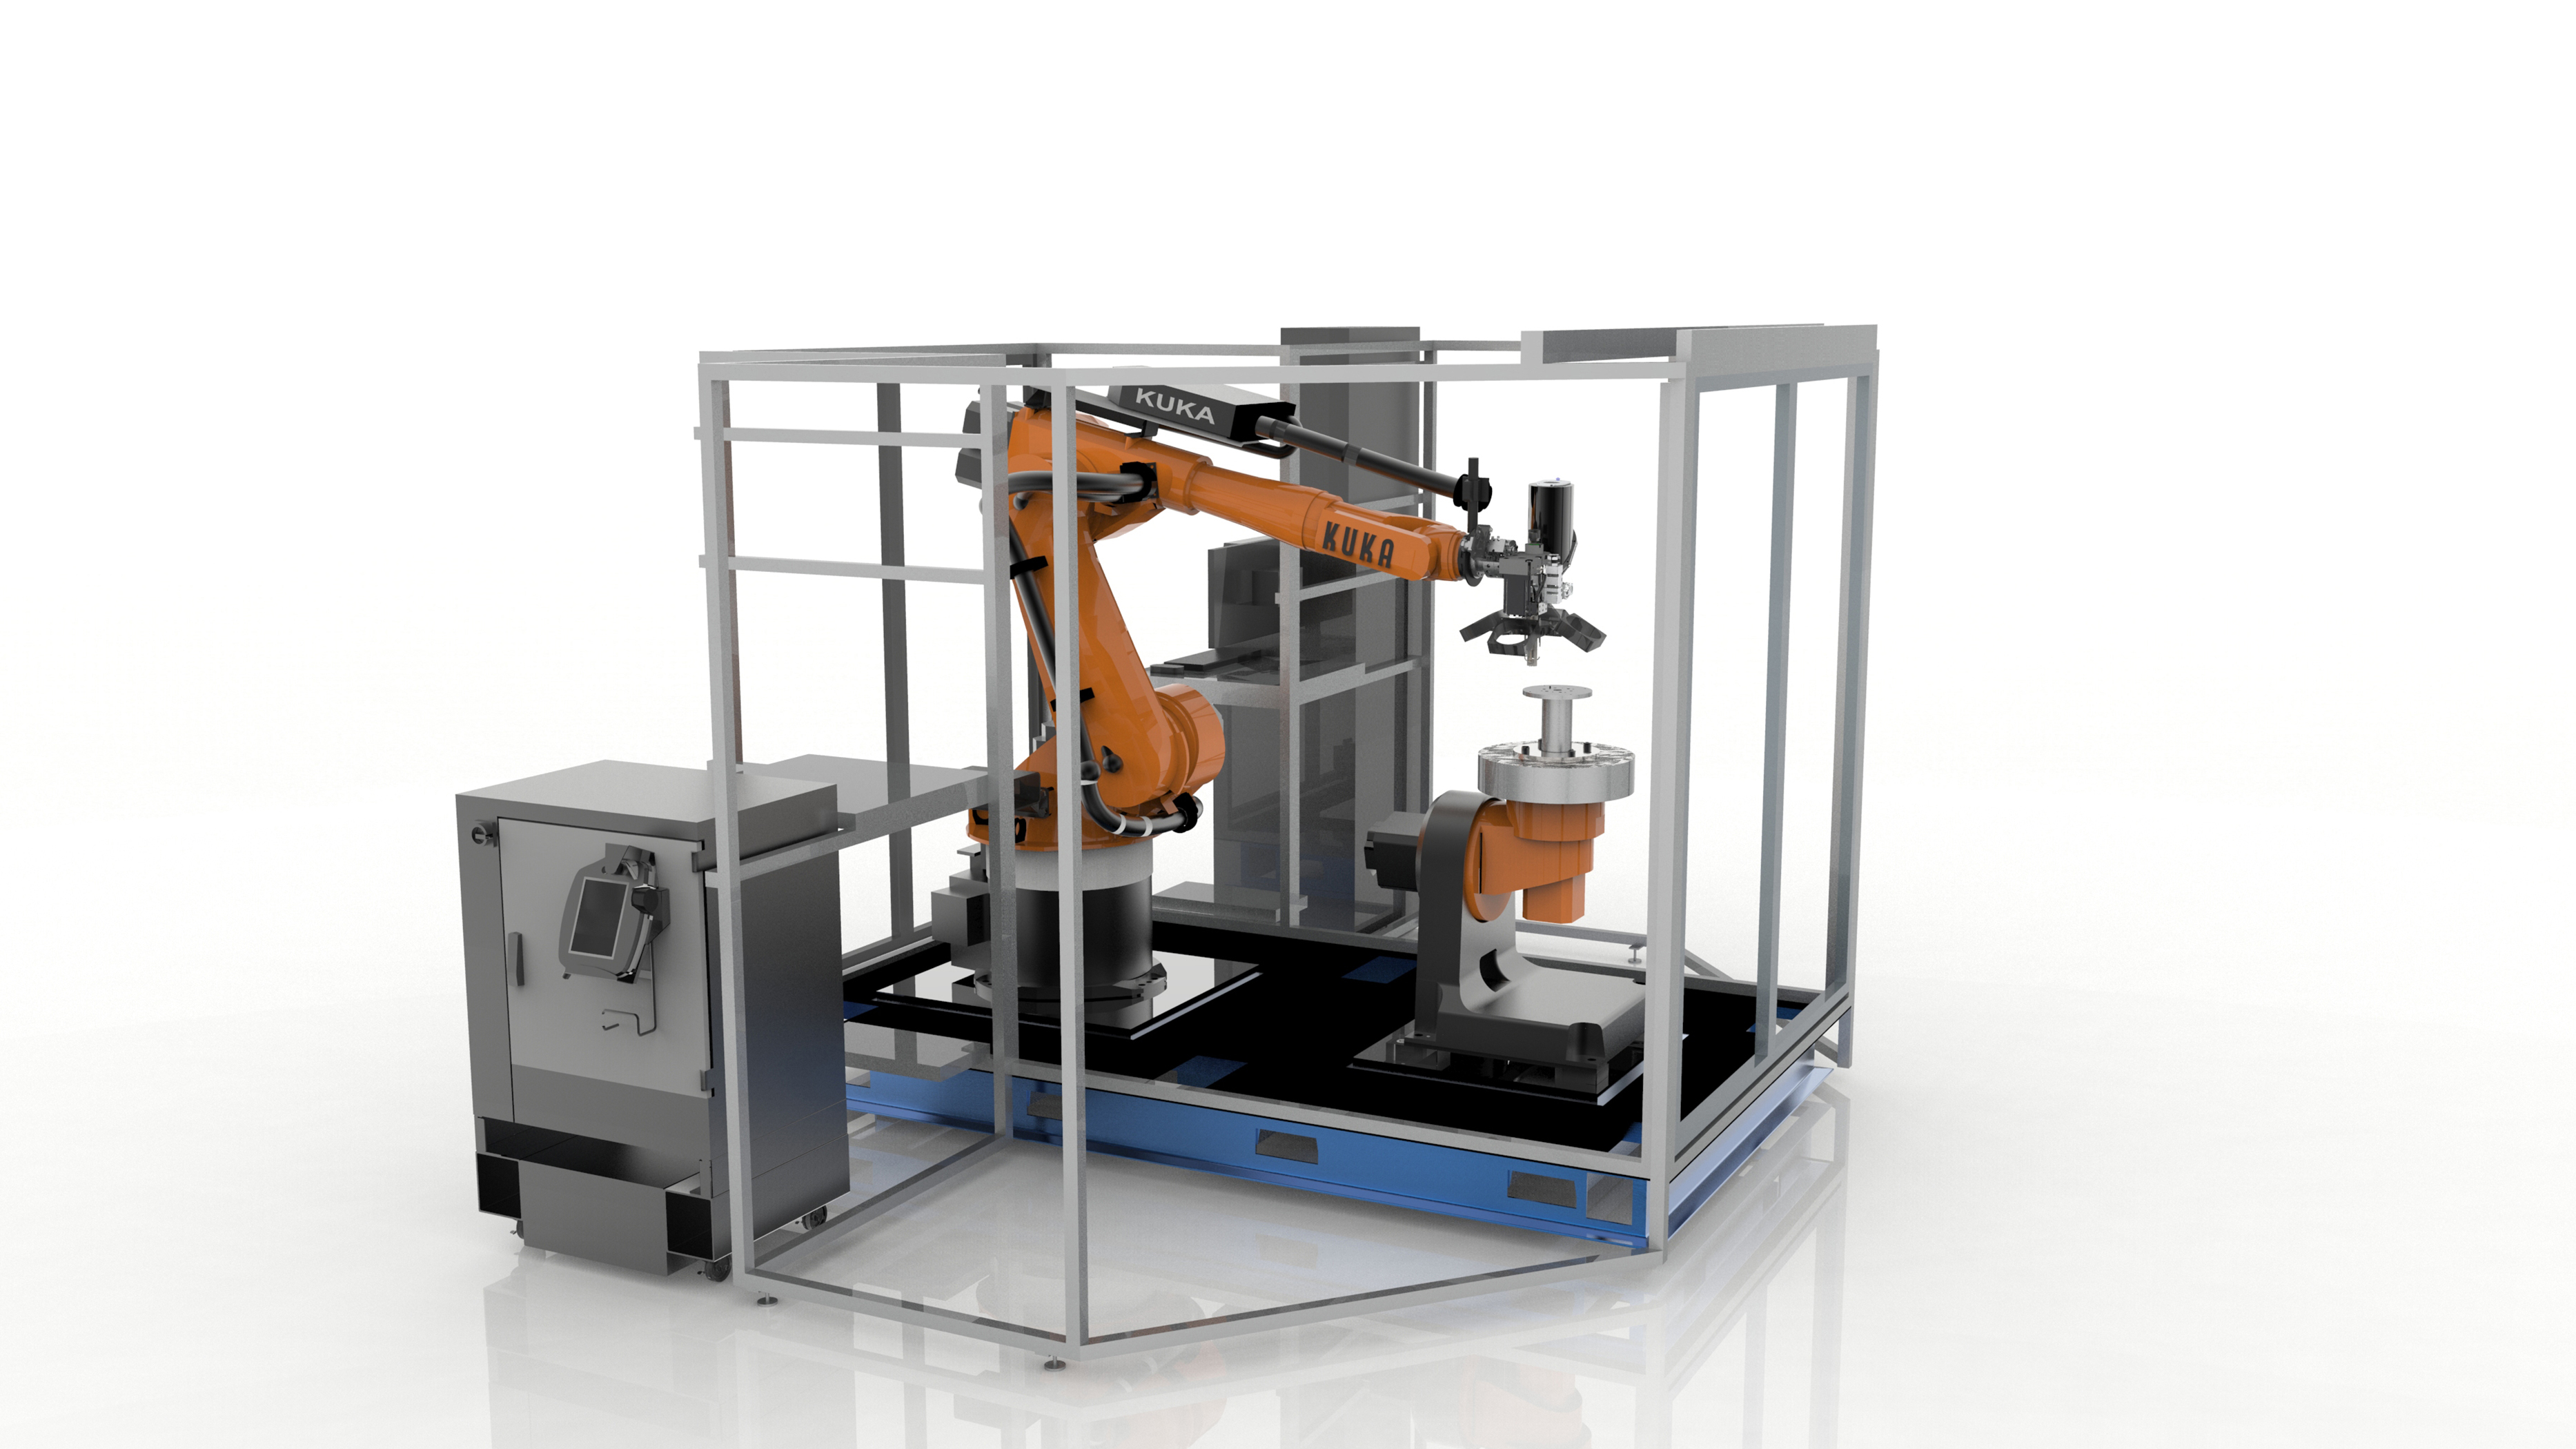 Stratasys Robotic Composite 3D Demonstrator unveils a hybrid approach for automated composite part production that enables the full value of additive manufacturing to be applied. Photo courtesy Stratasys.